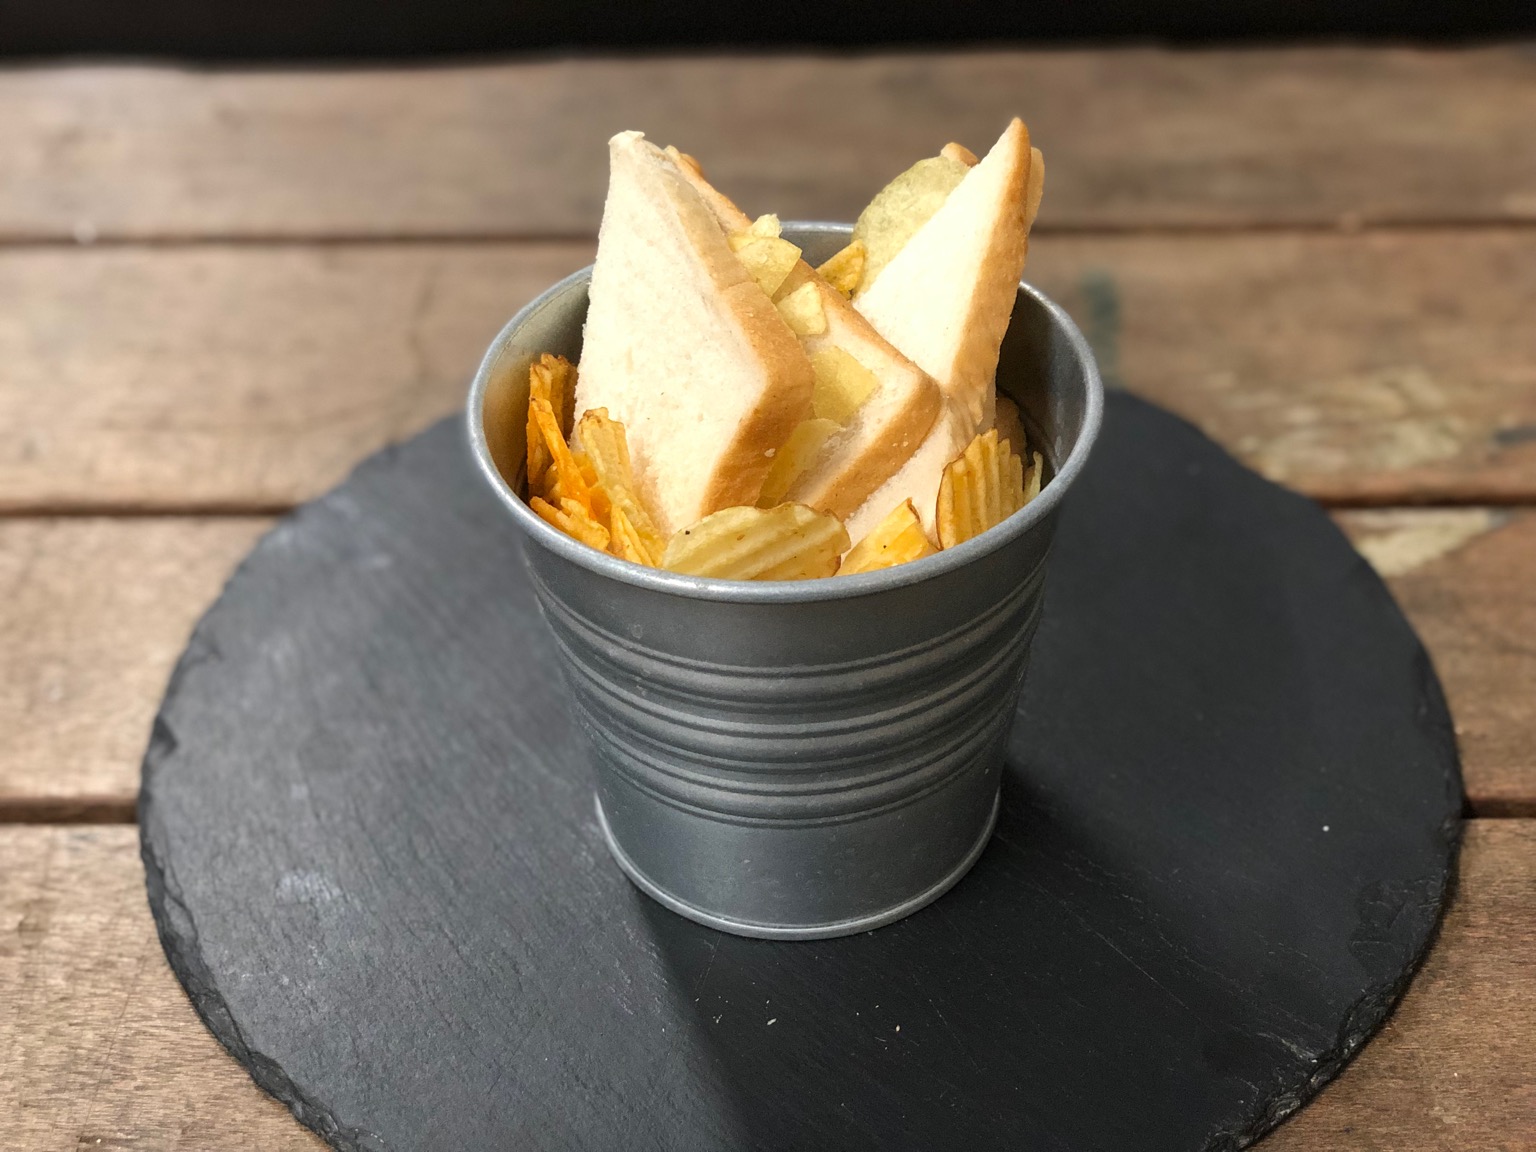 Metal bucket containing crisps and sandwich